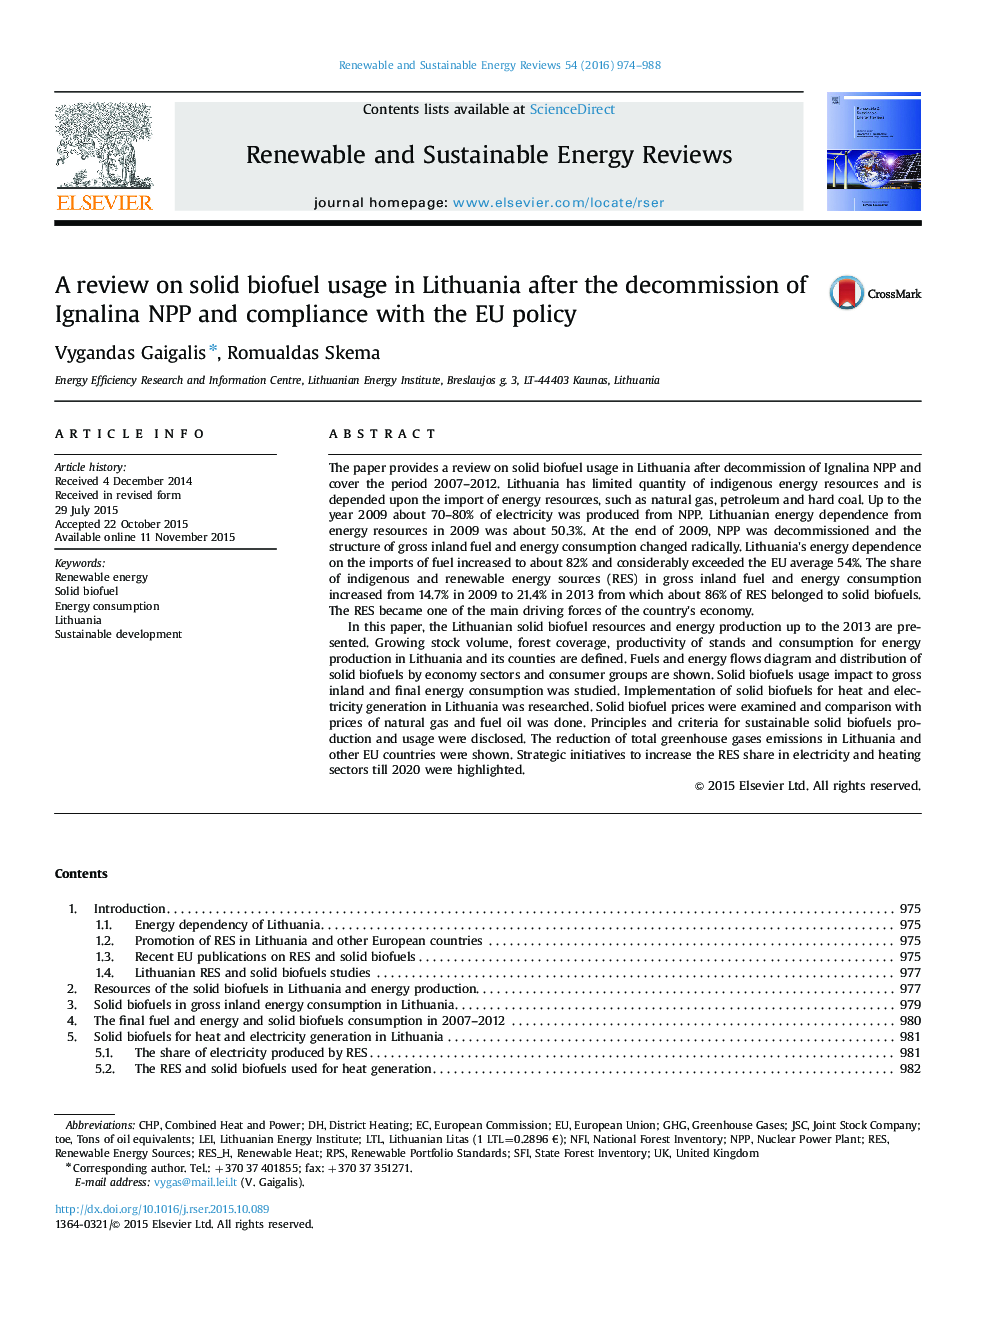 A review on solid biofuel usage in Lithuania after the decommission of Ignalina NPP and compliance with the EU policy